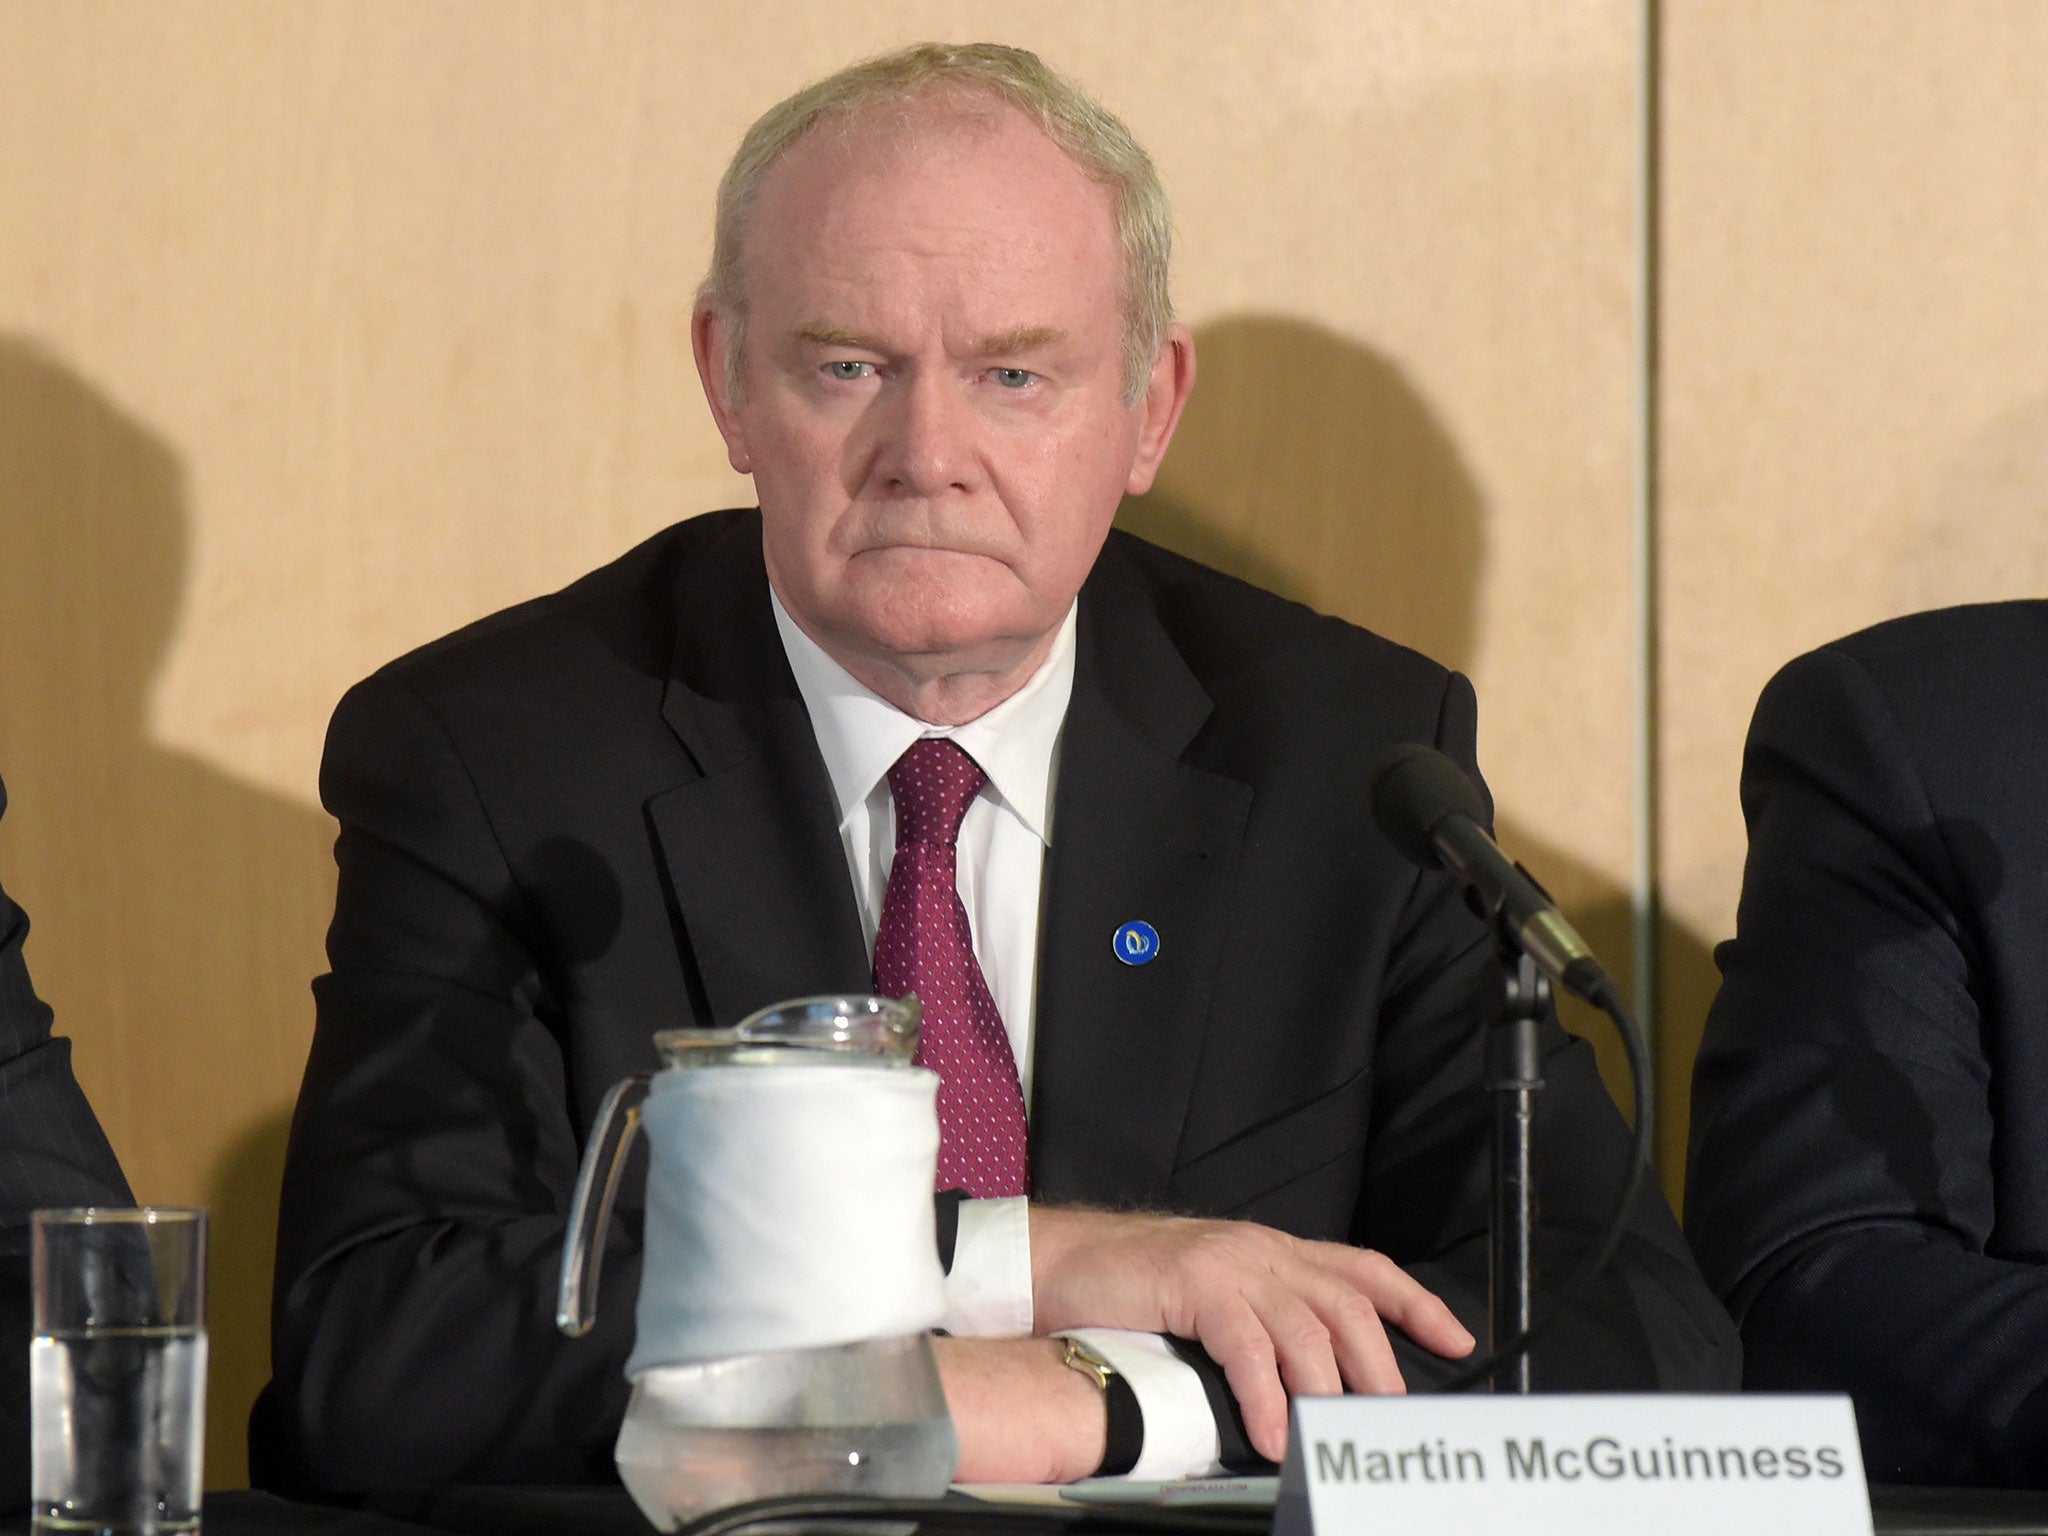 Martin McGuinness, deputy First Minister of Northern Ireland, declined to rule out the party’s MPs attending Westminster to vote against Section 50